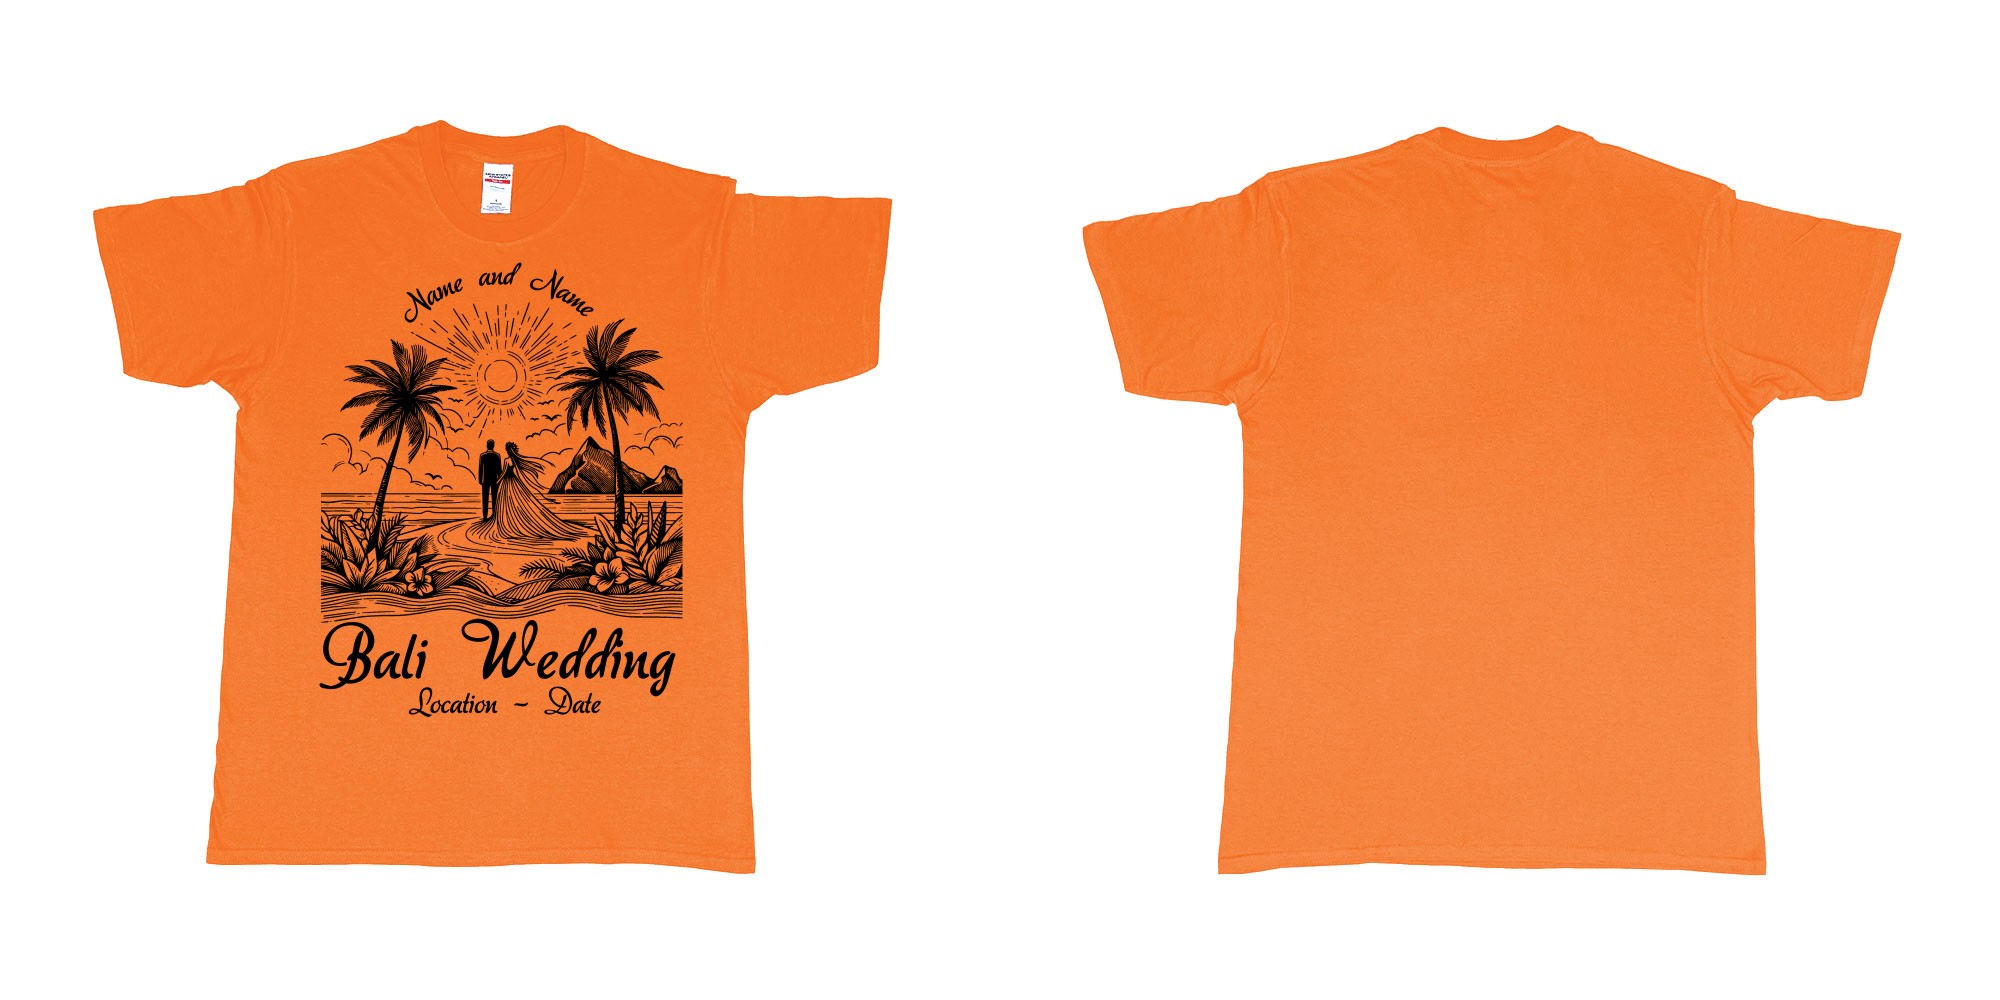 Custom tshirt design bali wedding drawing couple beach sunset palmtrees in fabric color orange choice your own text made in Bali by The Pirate Way